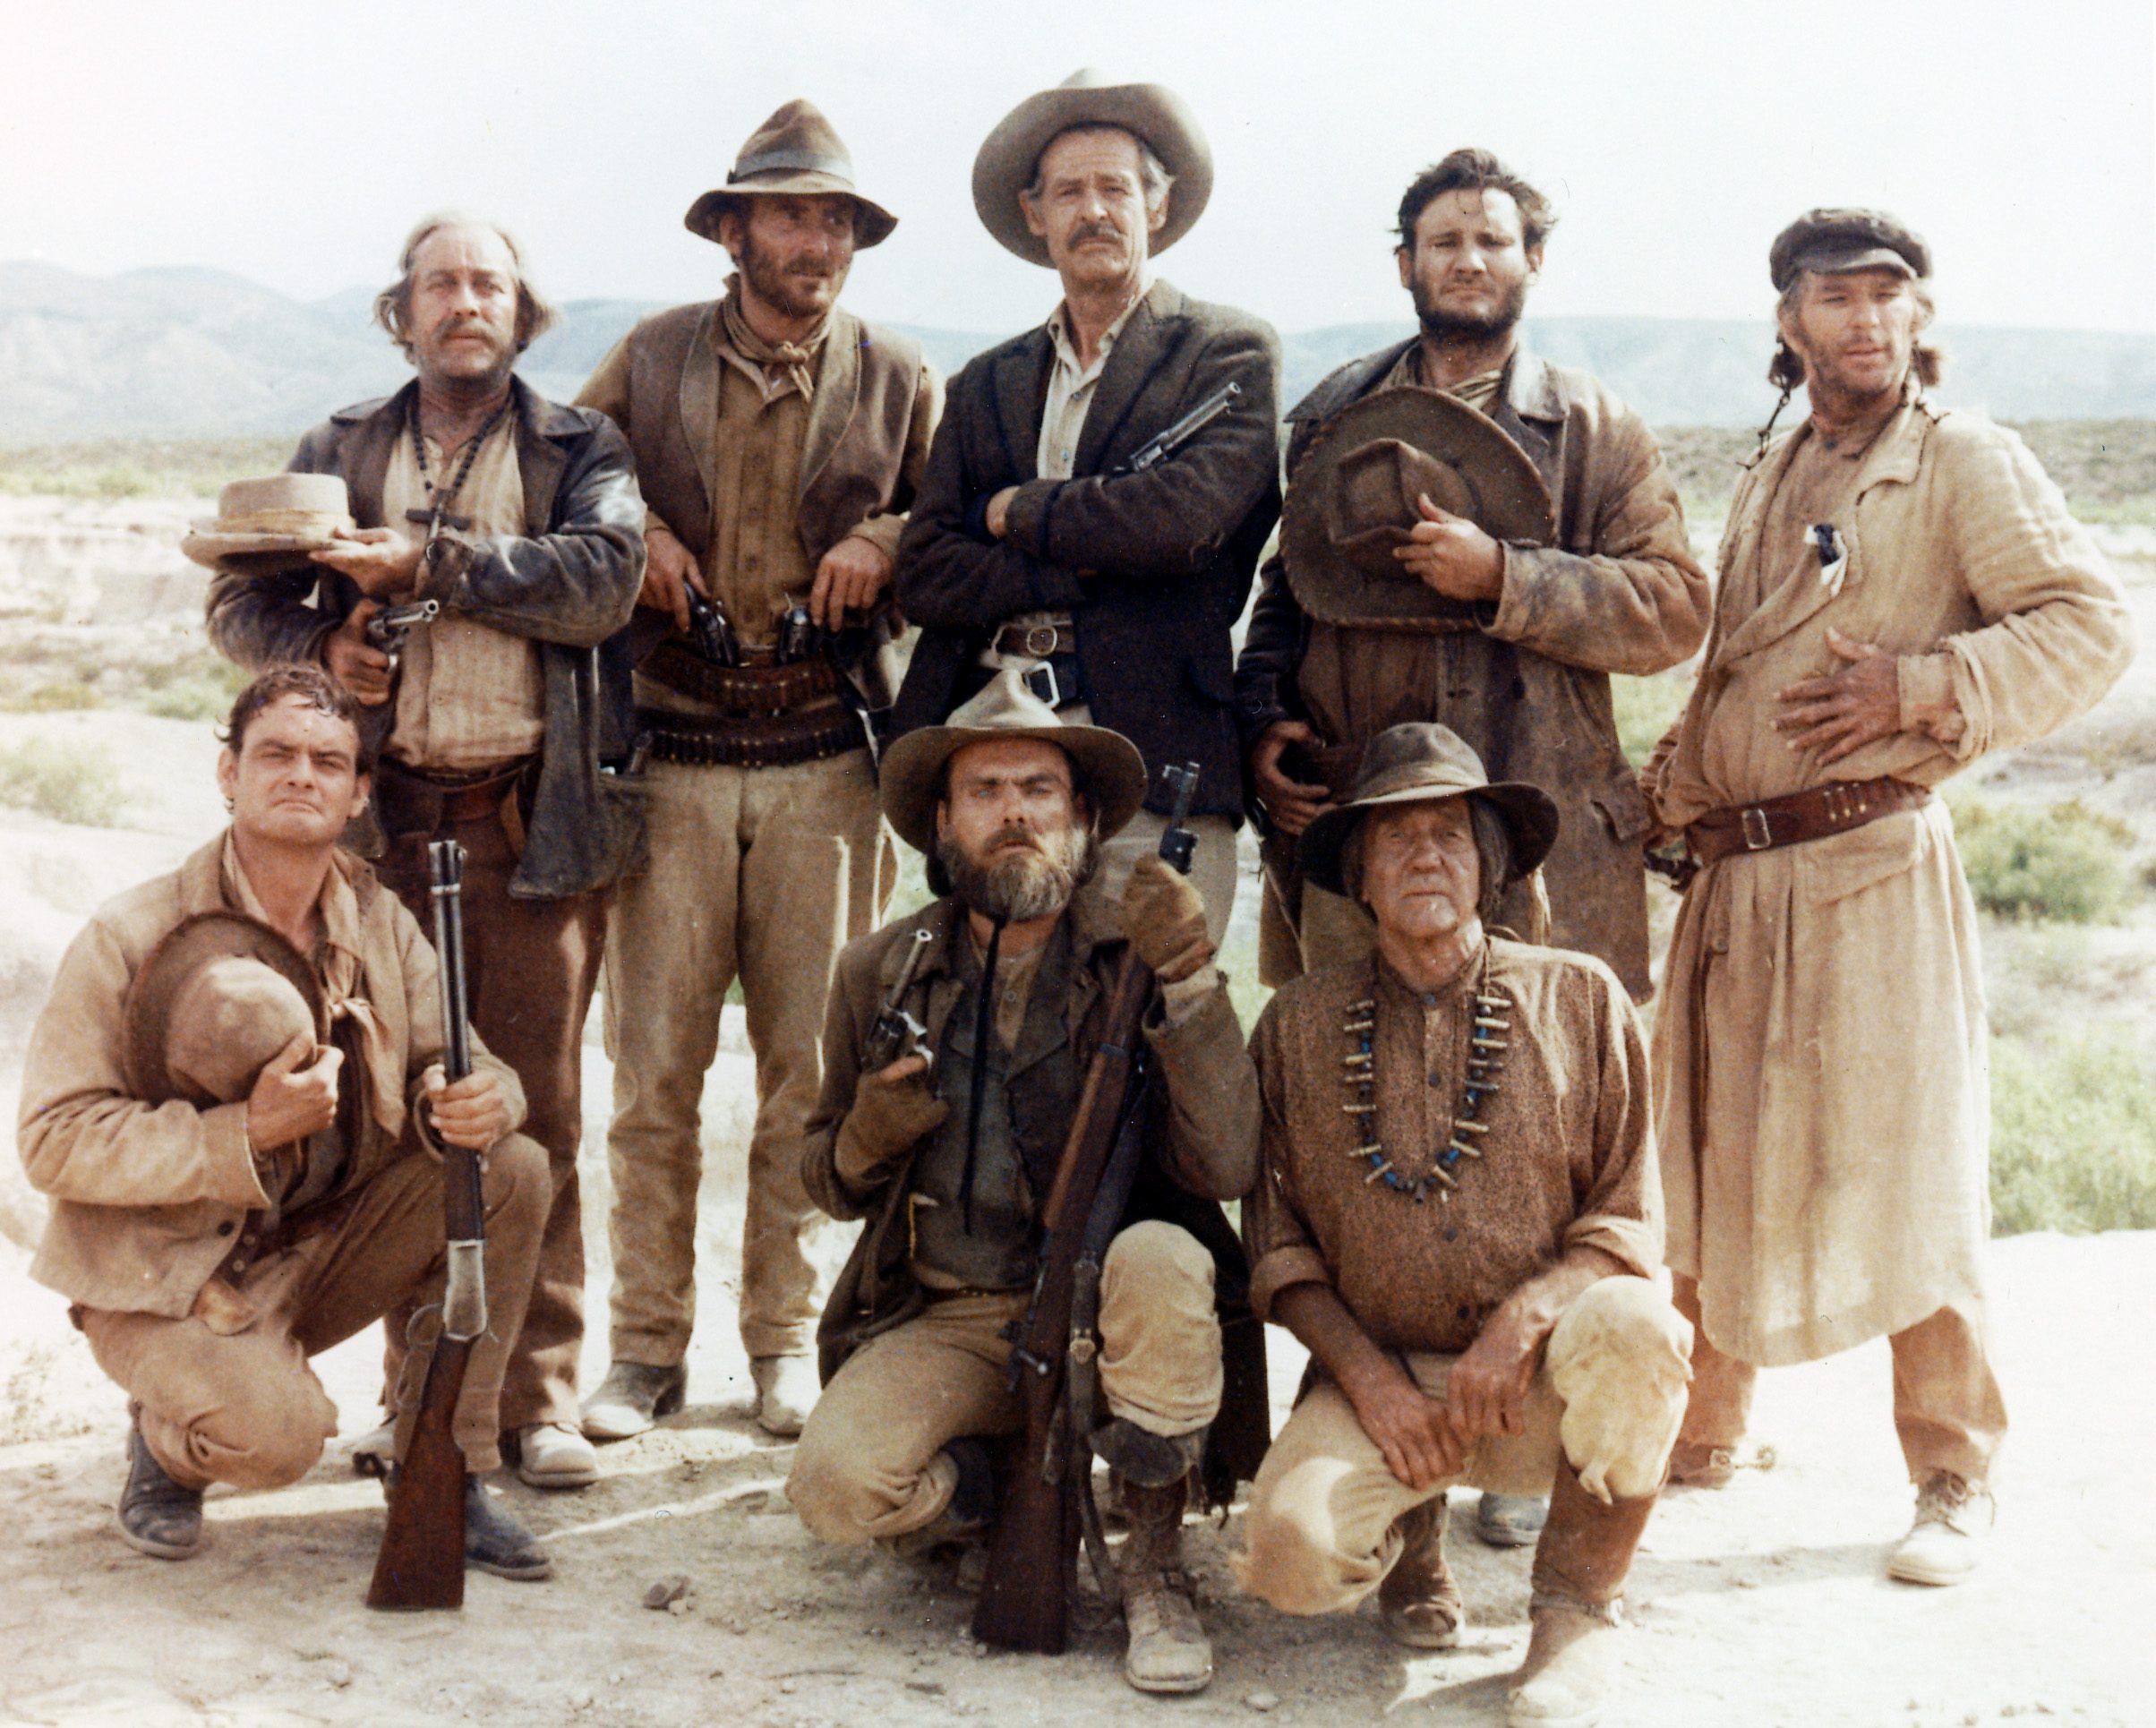 Robert Ryan (1909-1973), US actor, L Q Jones, US actor, and Strother Martin (1919-1980), US actor, among other members of the cast as they pose for a group portrait issued as publicity for the film, 'The Wild Bunch', 1969. The western, directed by Sam Peckinpah (1925-1984), starred Ryan as 'Deke Thornton', Jones as 'TC', and Martin as 'Coffer'. (Photo by Silver Screen Collection/Getty Images)